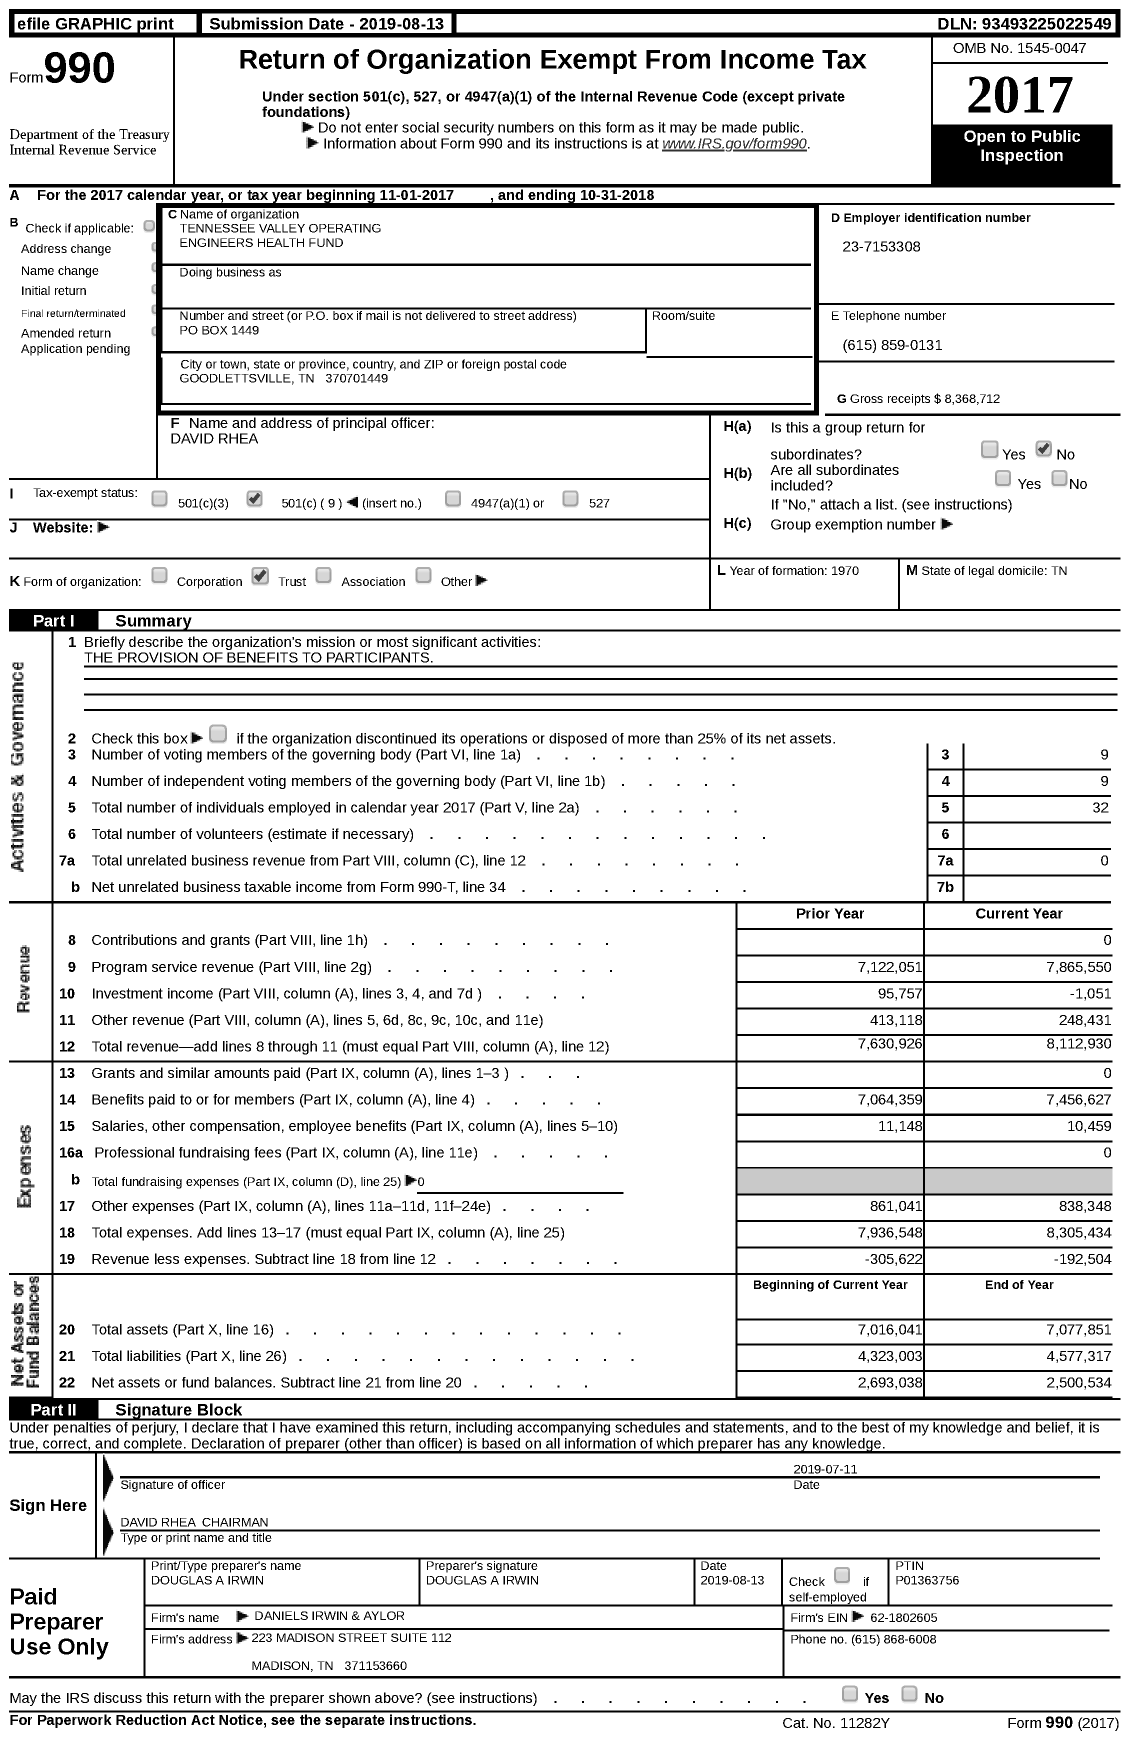 Image of first page of 2017 Form 990 for Tennessee Valley Operating Engineers Health Fund